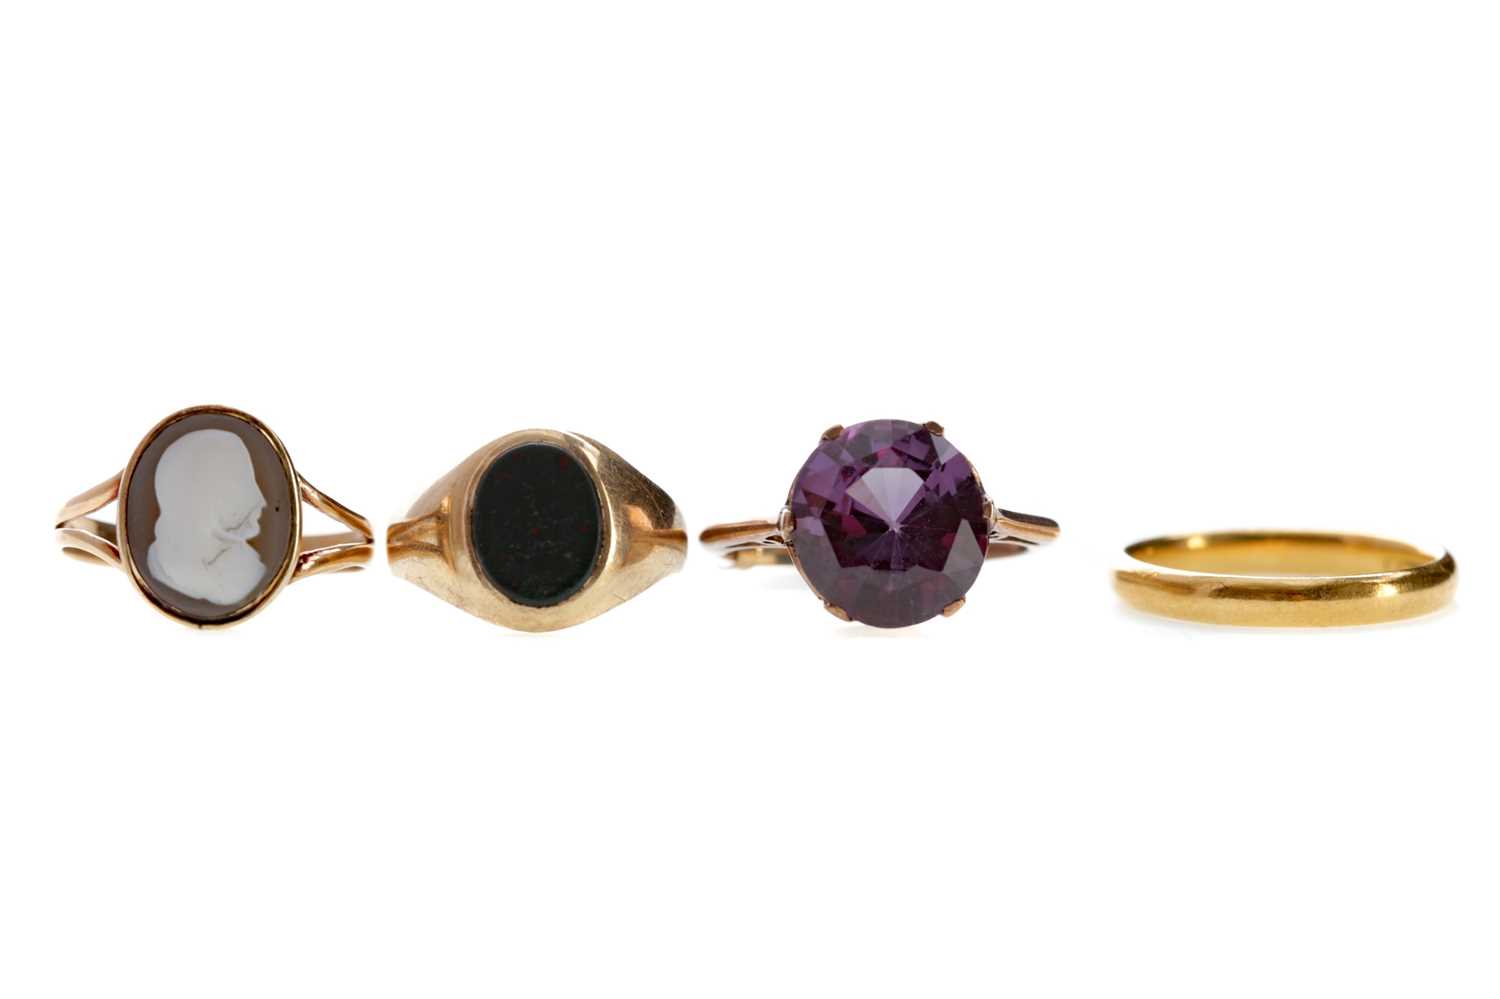 Lot 1331 - A WEDDING RING, BLOODSTONE AGATE RING, PURPLE GEM SET RING AND A CAMEO RING